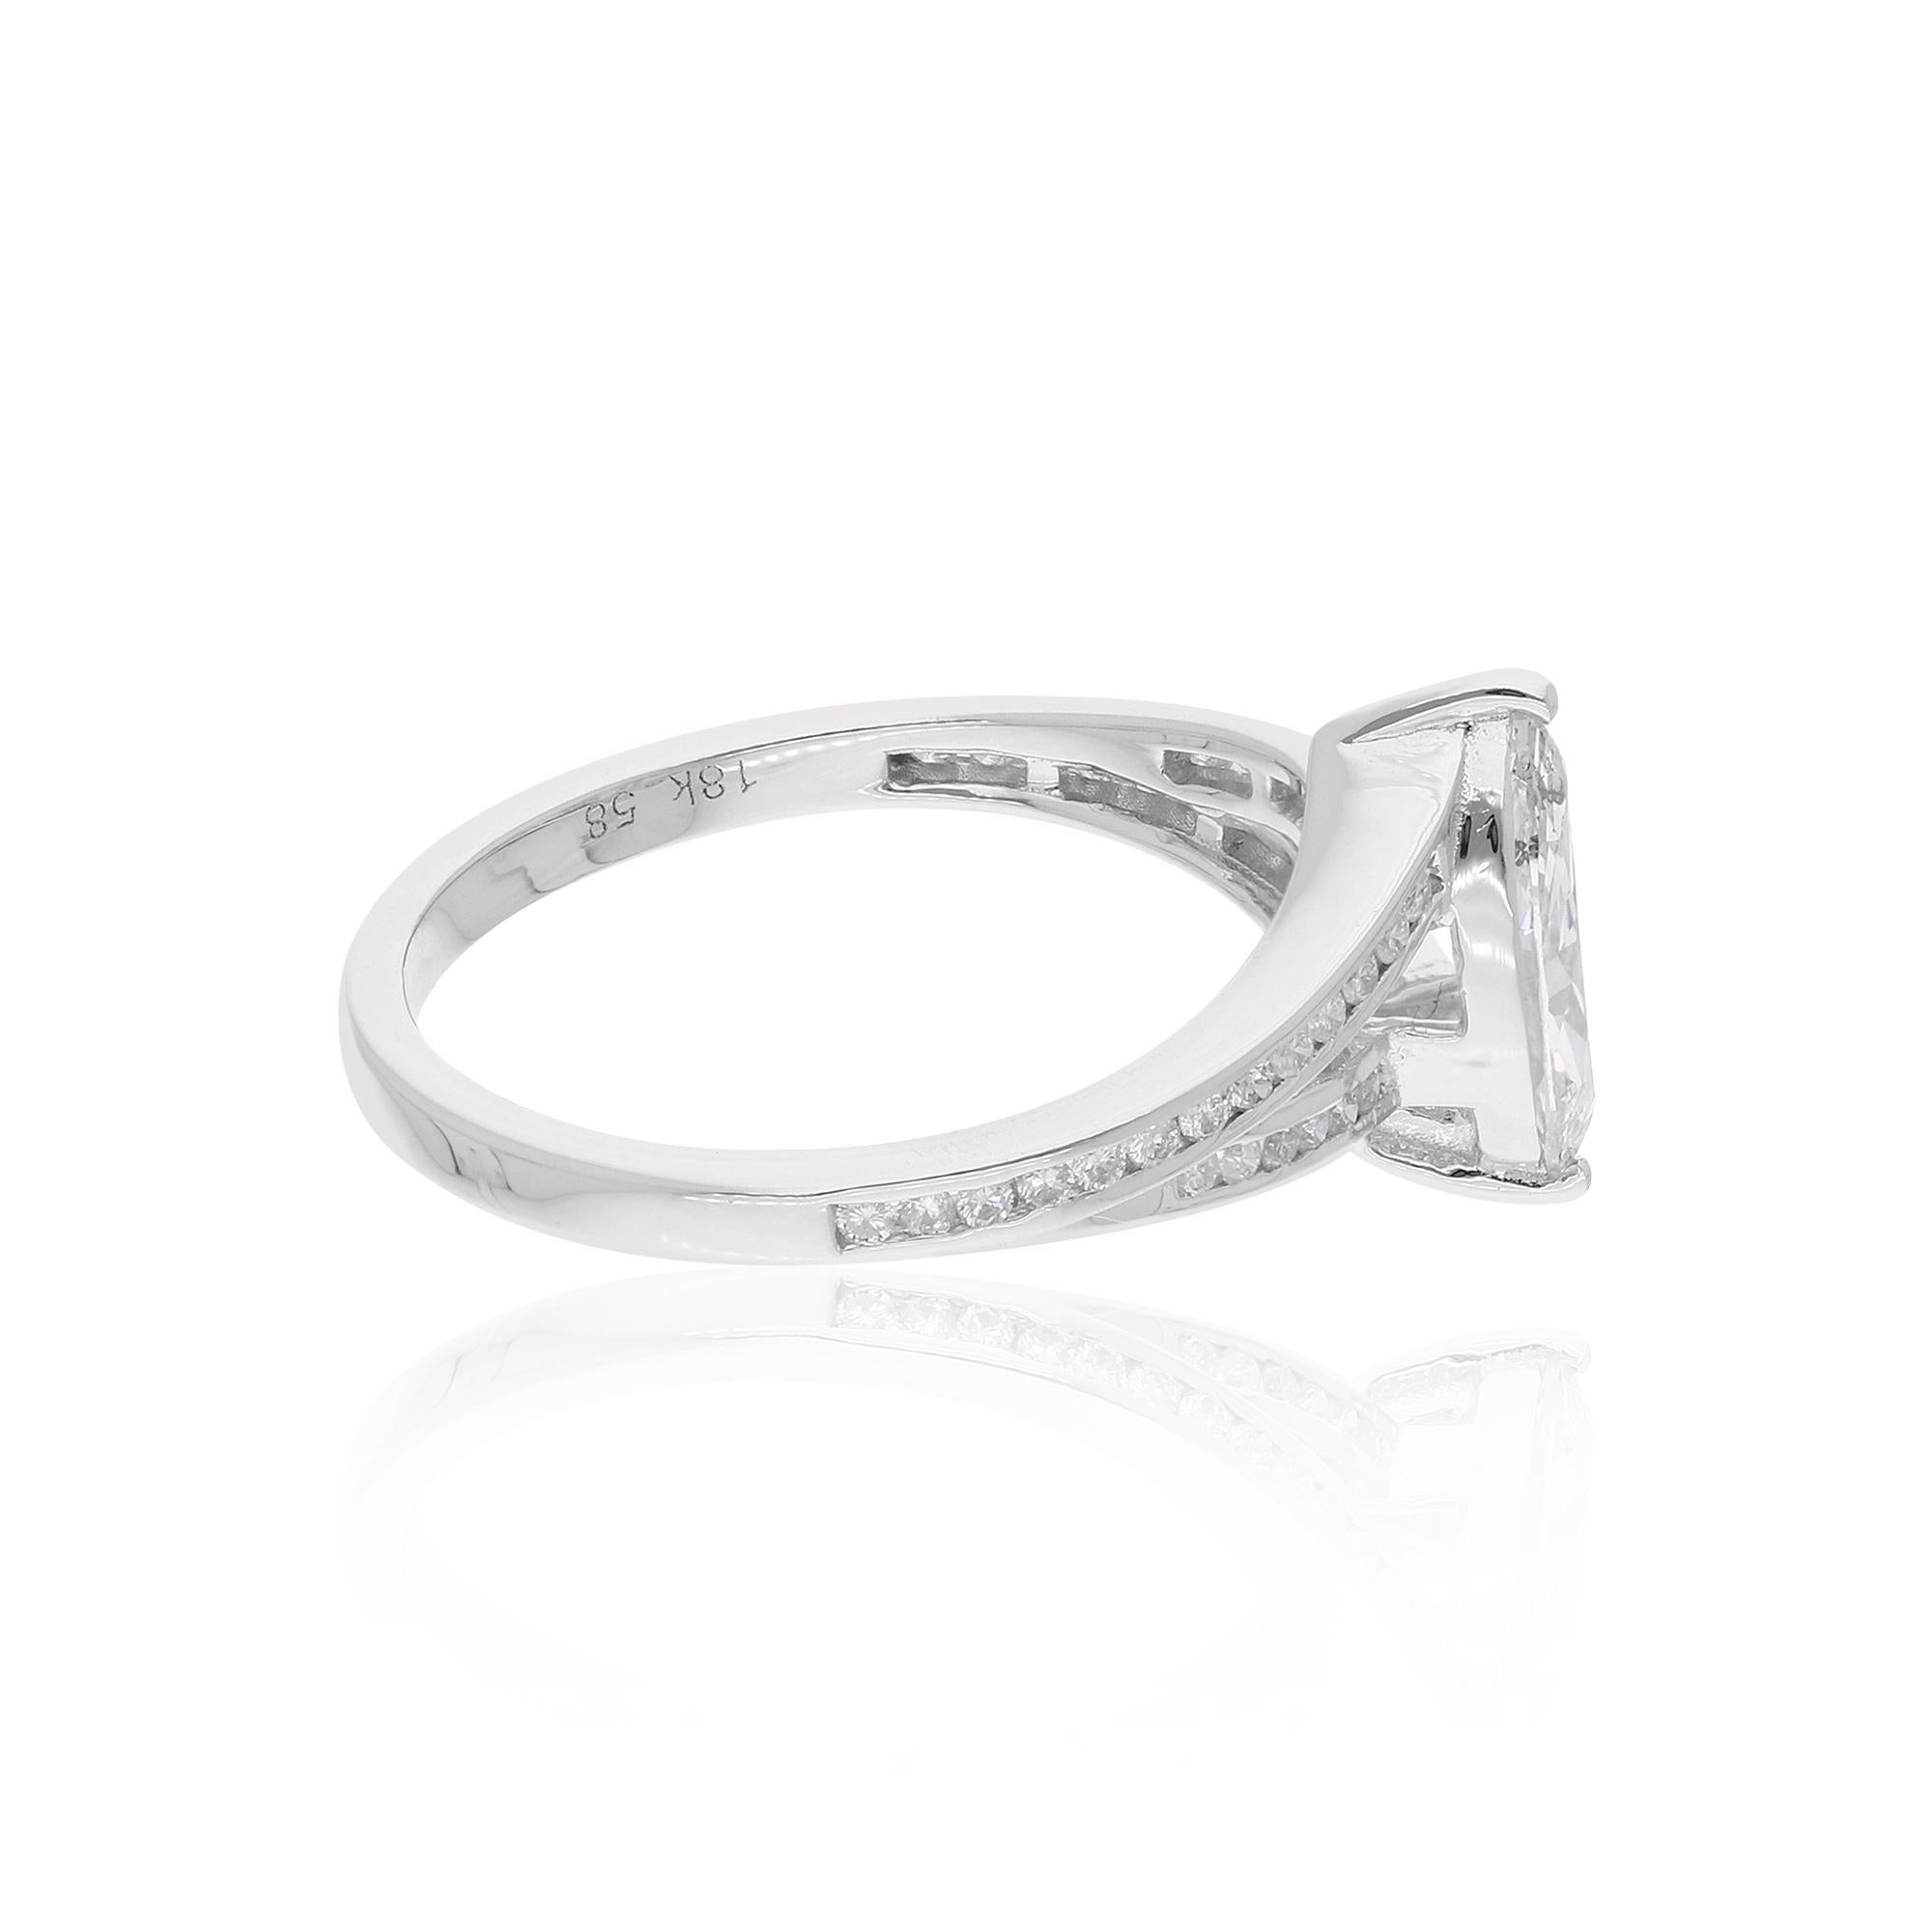 Simple and elegant, this 18k White Gold Diamond studded Ring will make your look fashionable and classy. Its classy shine and flawless finish enhances its majestic charm and makes it more adorable.

✧✧Welcome To Our Shop Spectrum